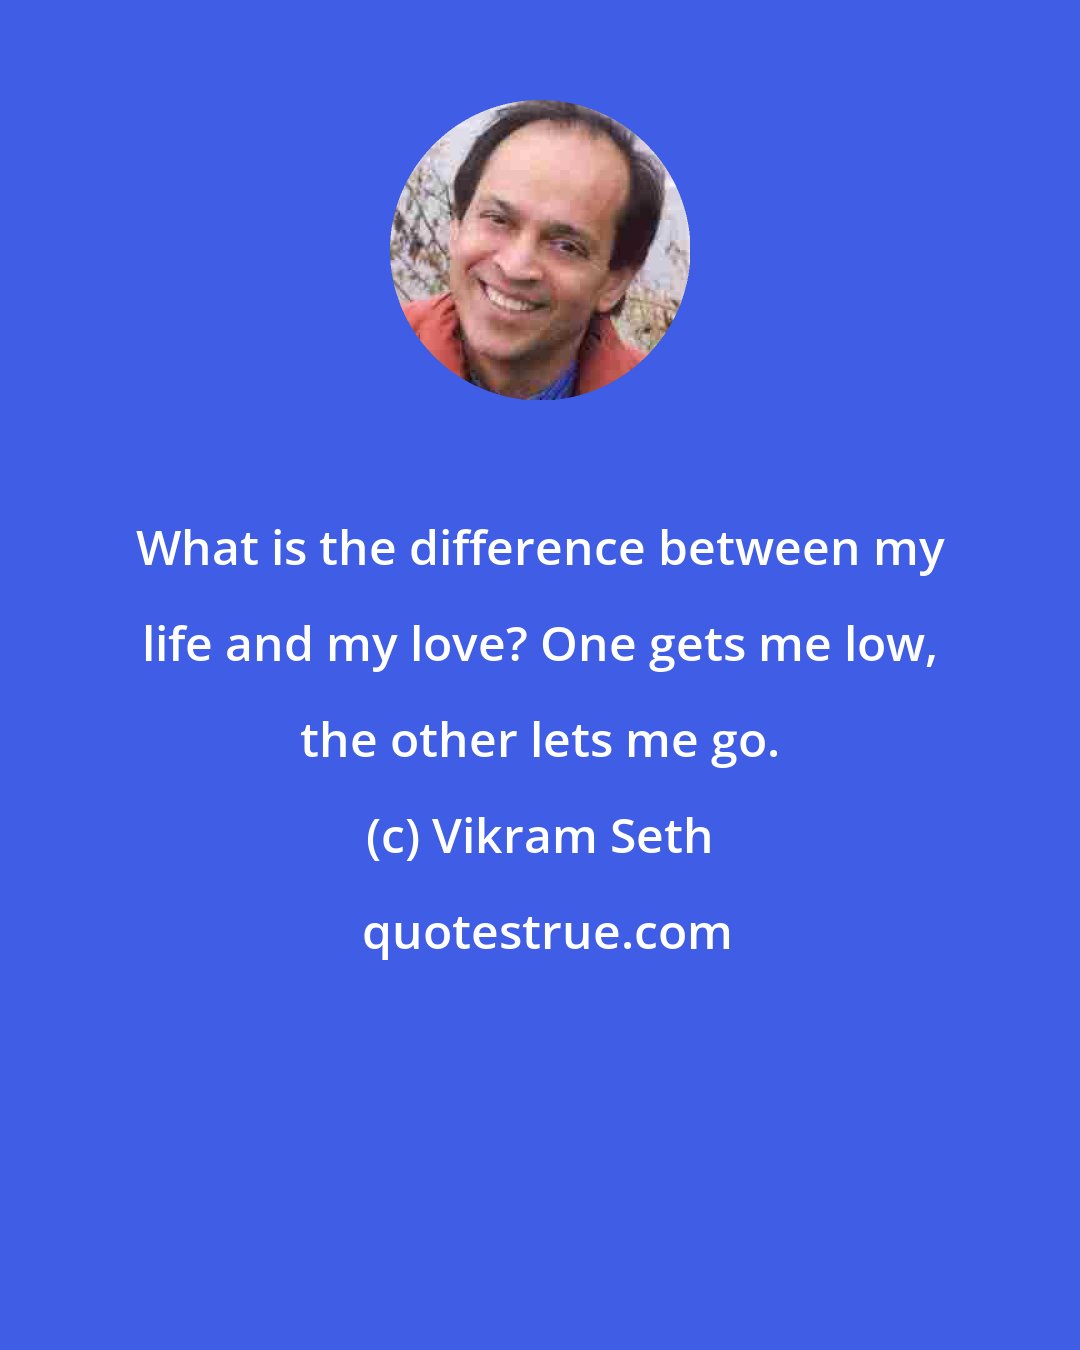 Vikram Seth: What is the difference between my life and my love? One gets me low, the other lets me go.